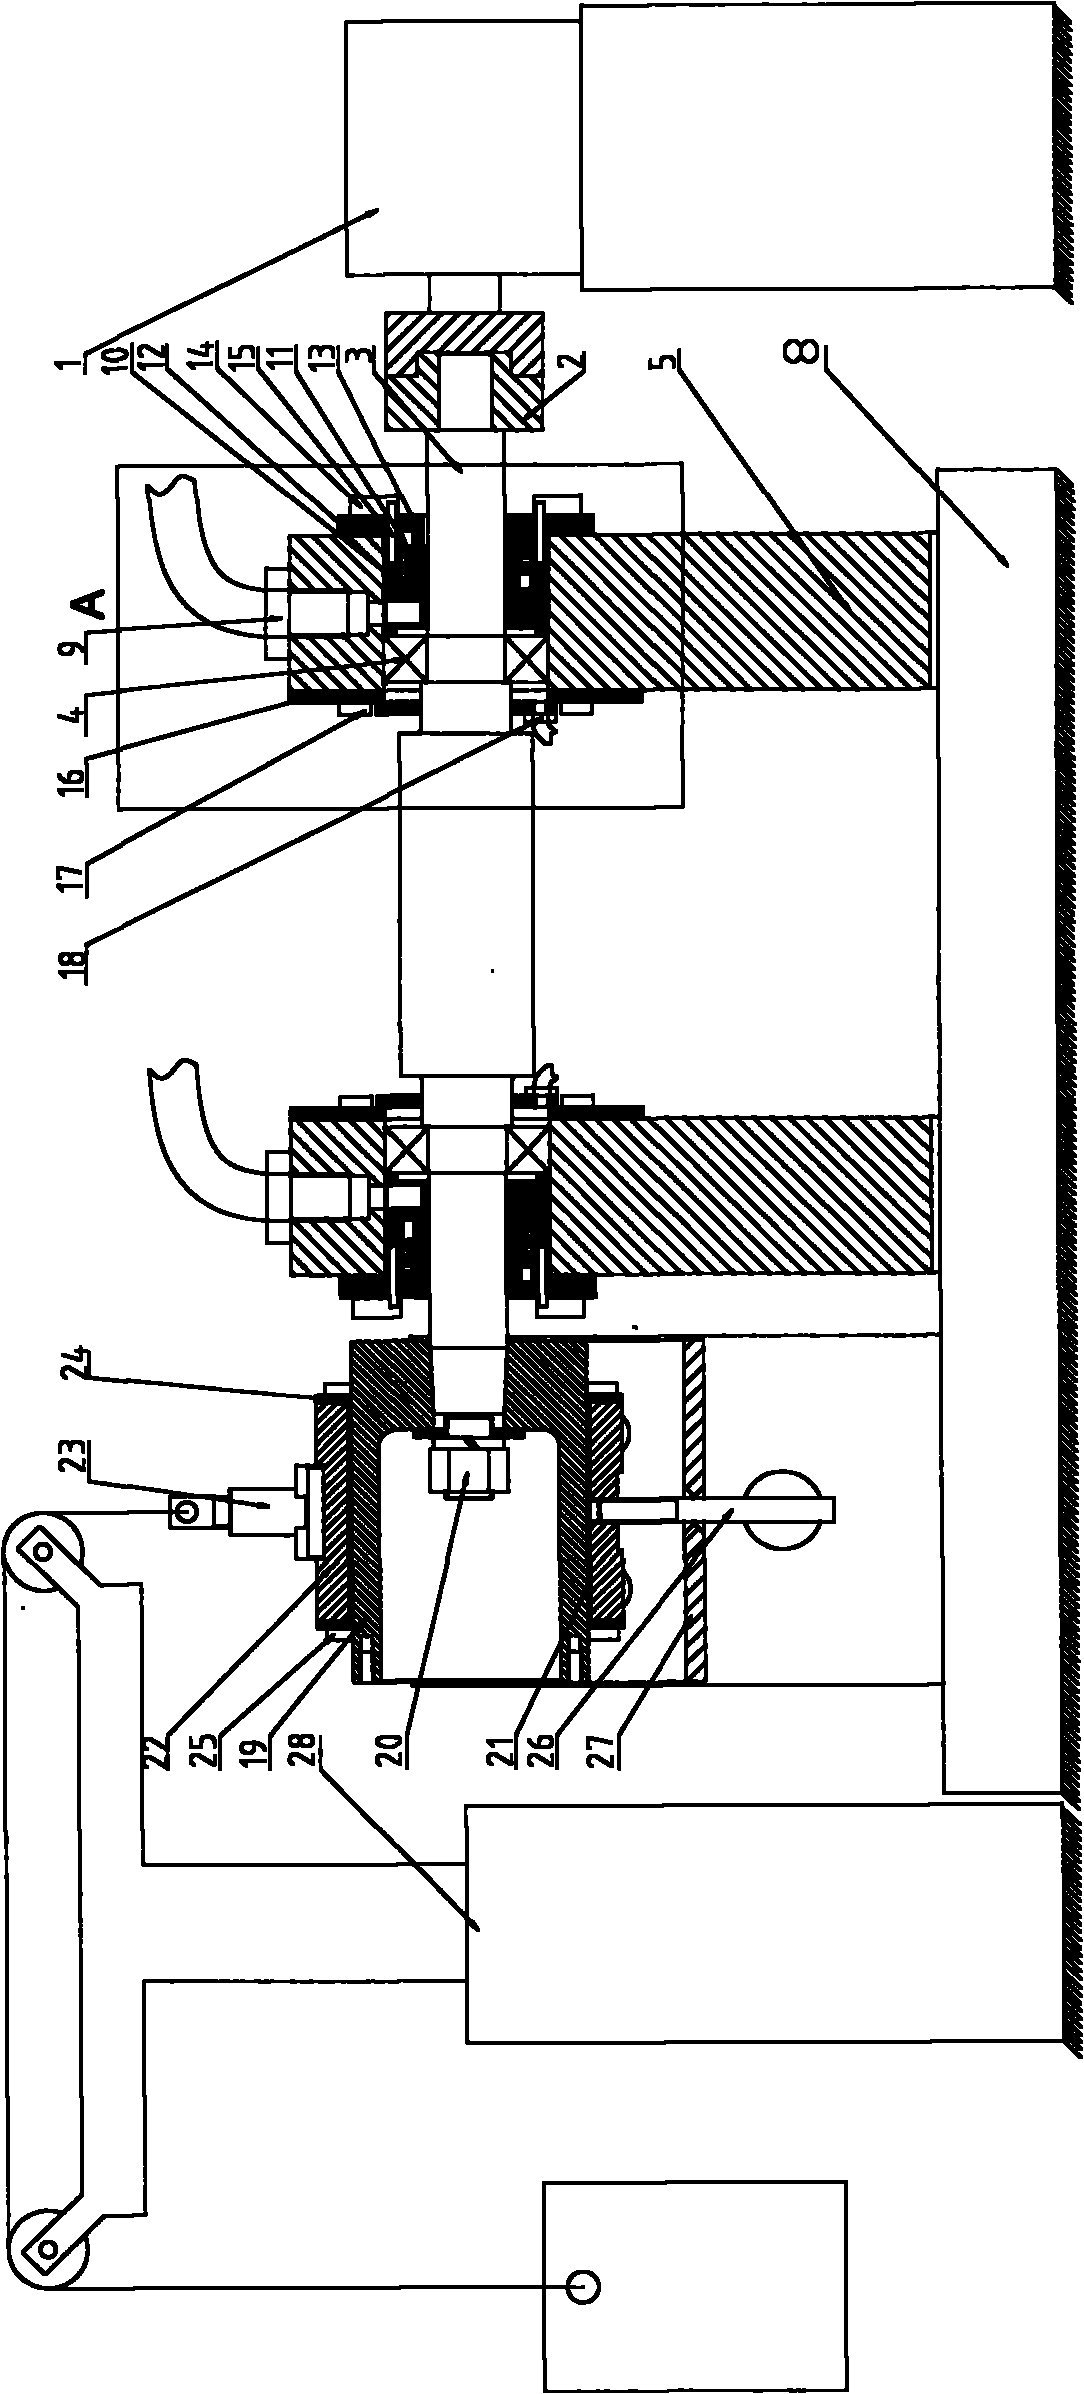 Test device for testing performance of compliant foil gas journal bearing